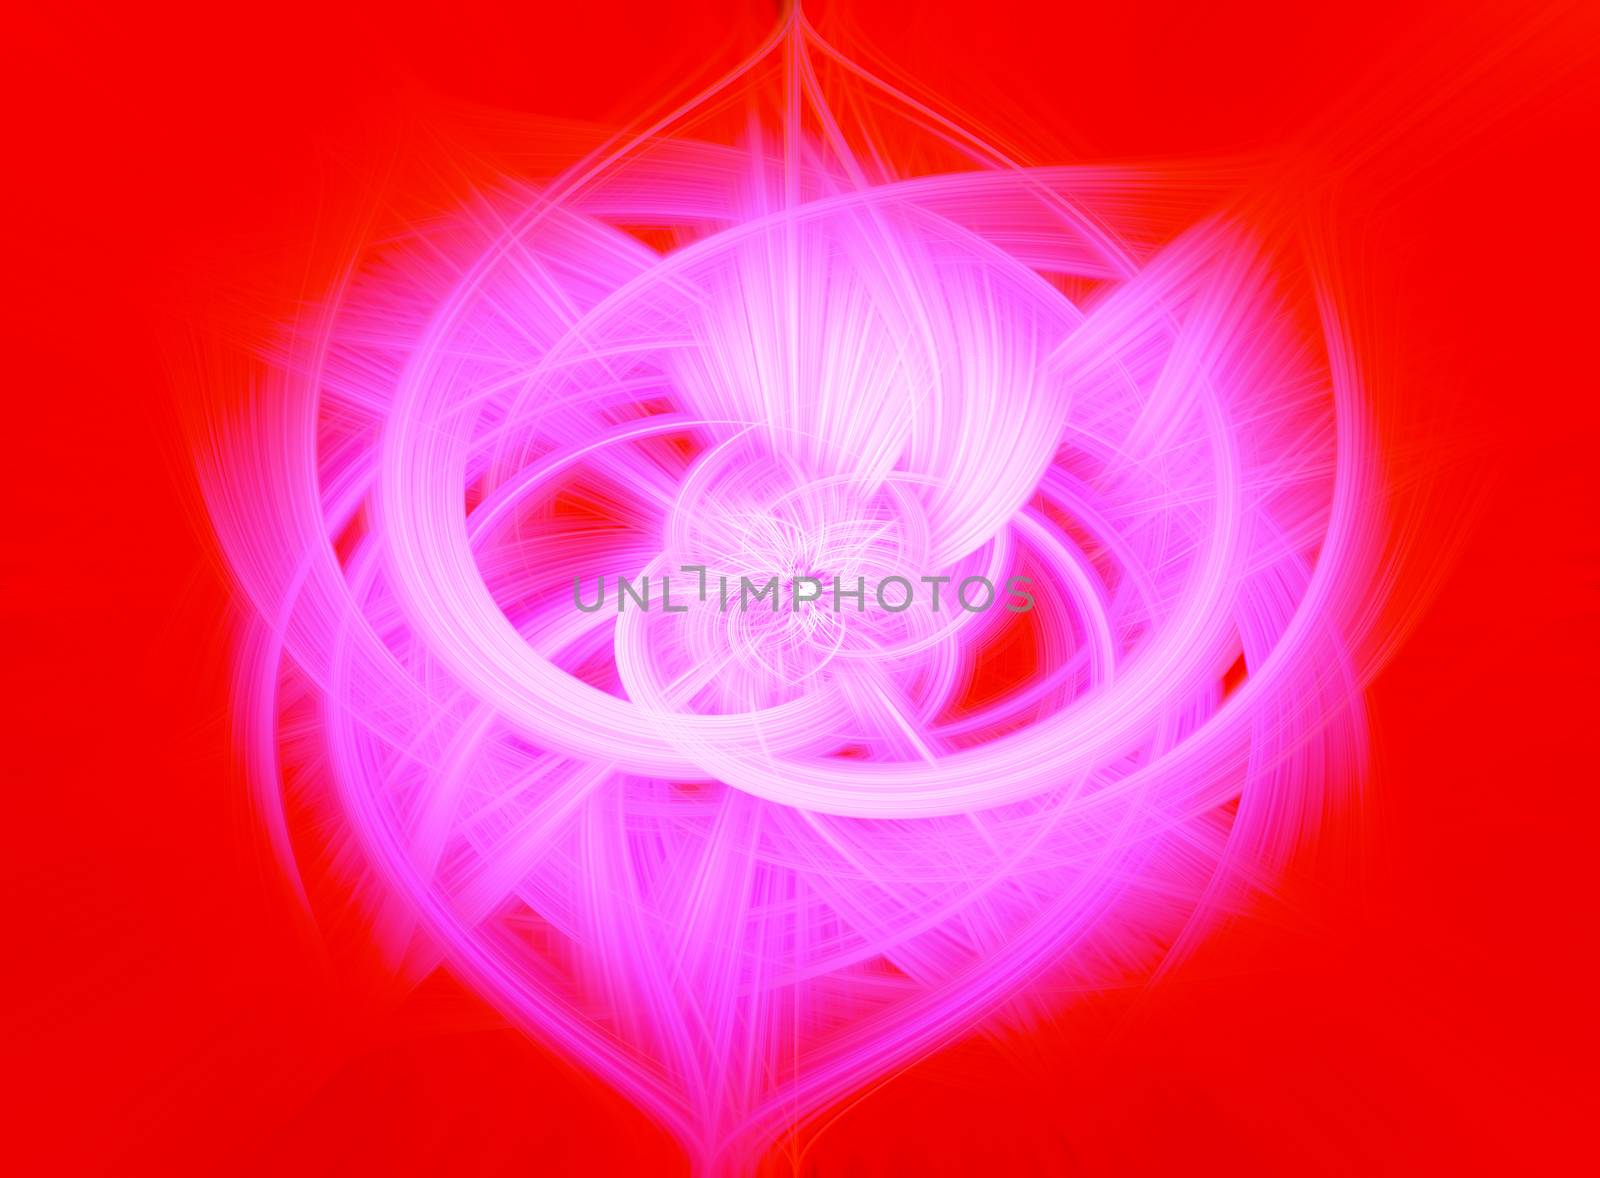 Beautiful abstract intertwined glowing 3d fibers forming a shape of sparkle, flame, flower, interlinked hearts. Bright red and pink colors. Illustration.